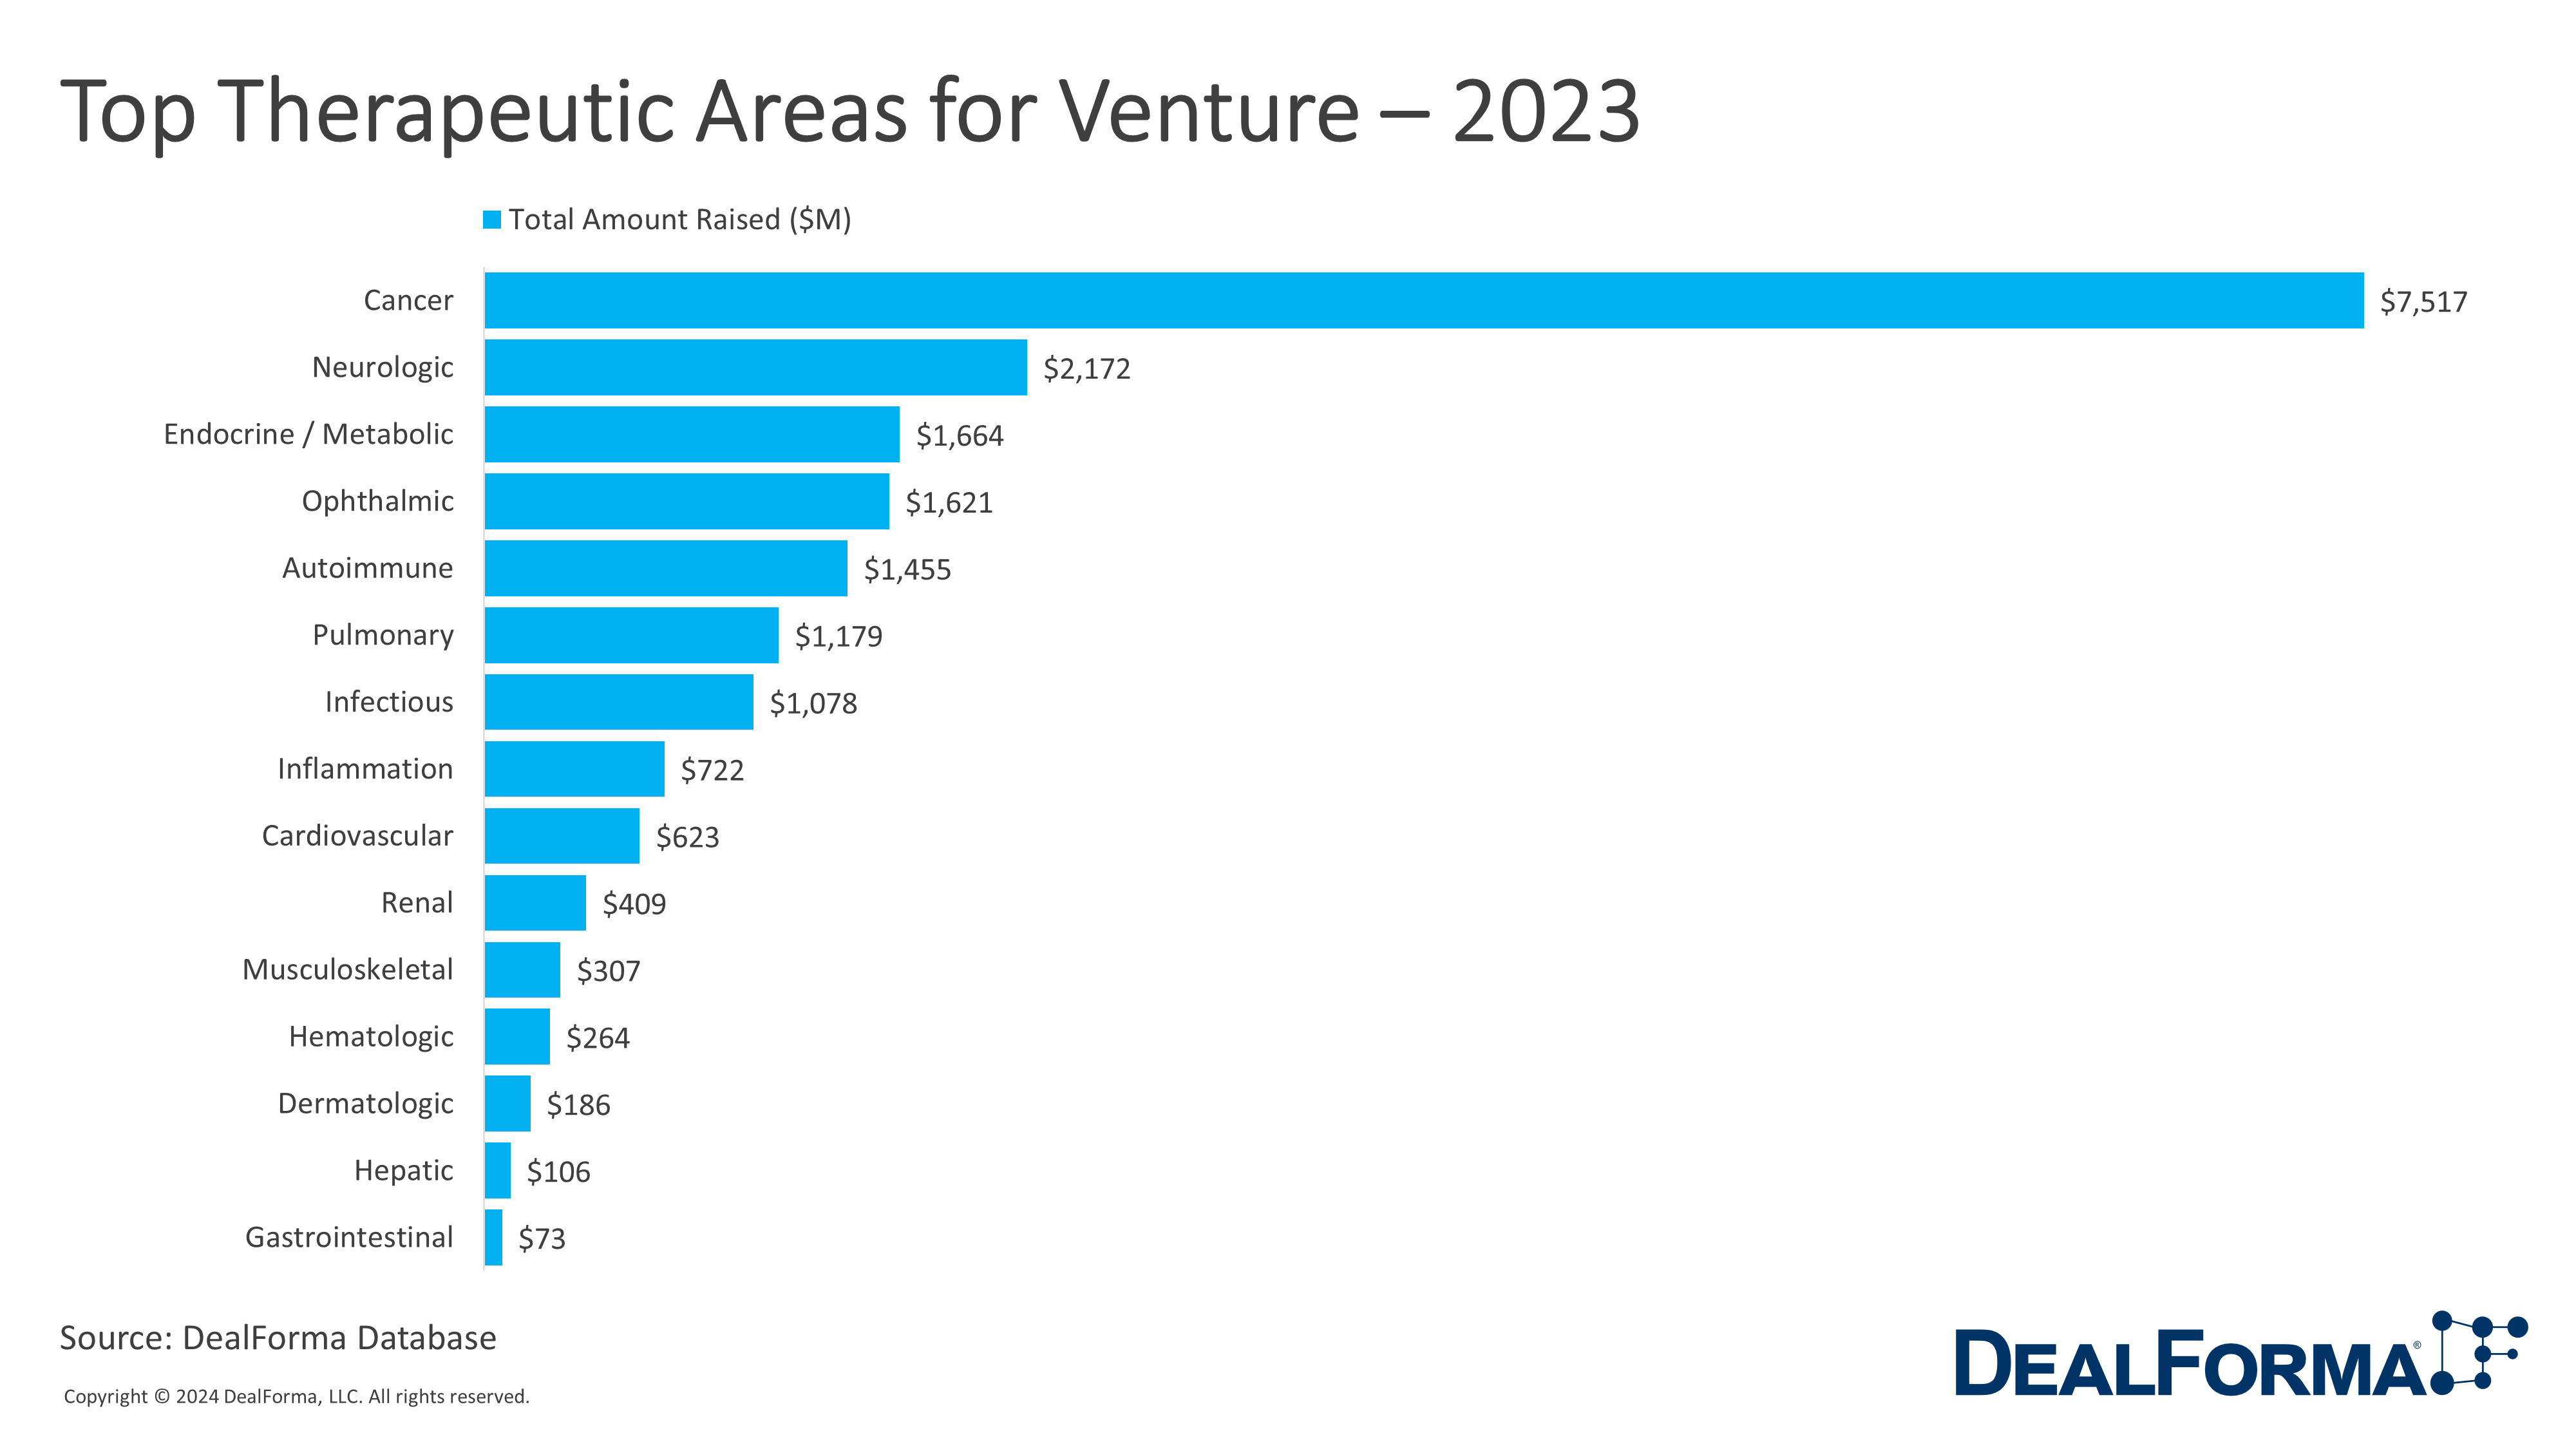 Top Therapeutic Areas for Venture – 2023